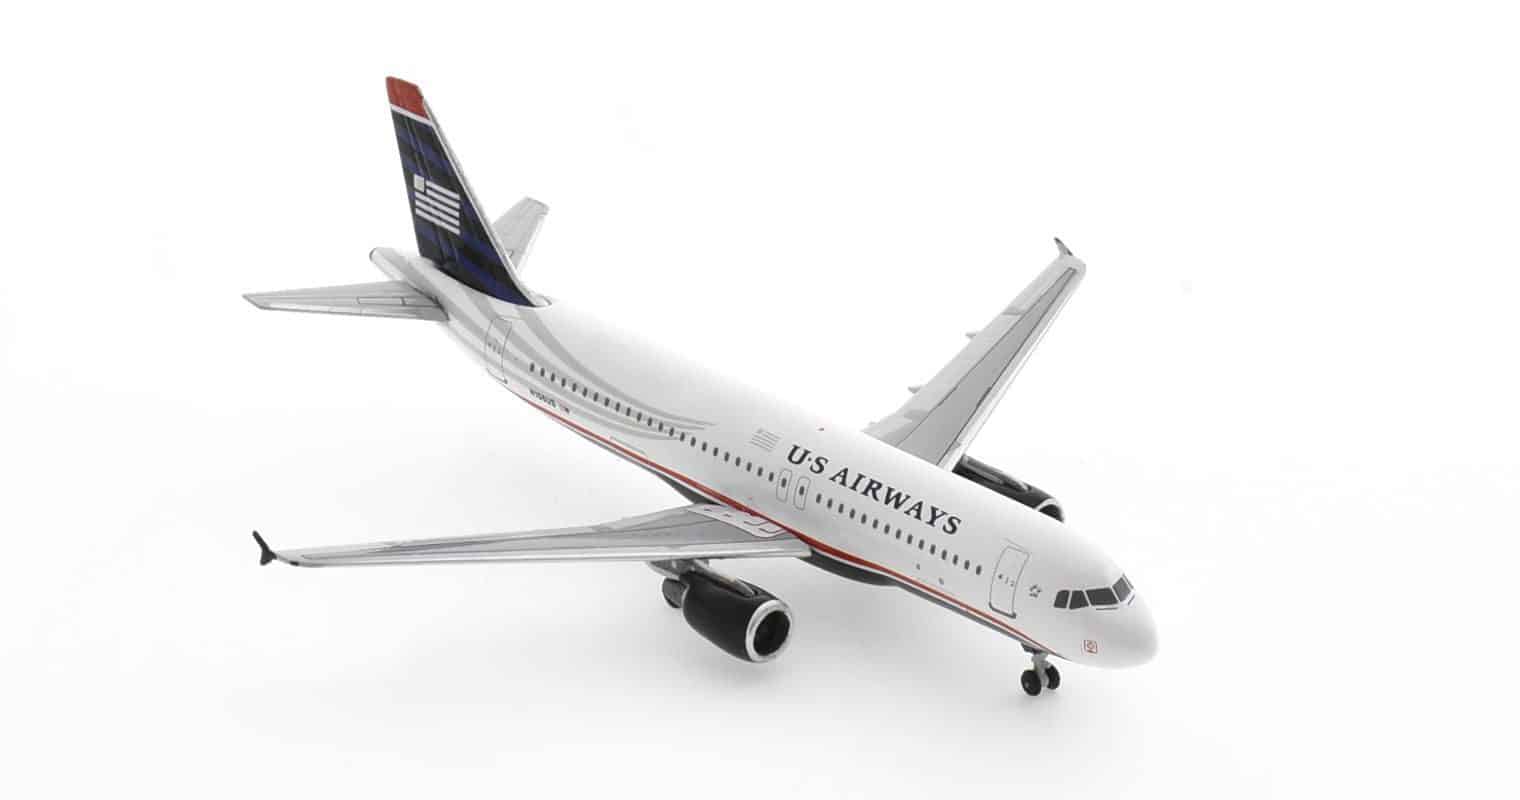 Front starboard side view of AC419976 - 1/400 scale diecast model of US Airway's A320-200 registration N106US that landed in the Hudson River on January 15, 2009.